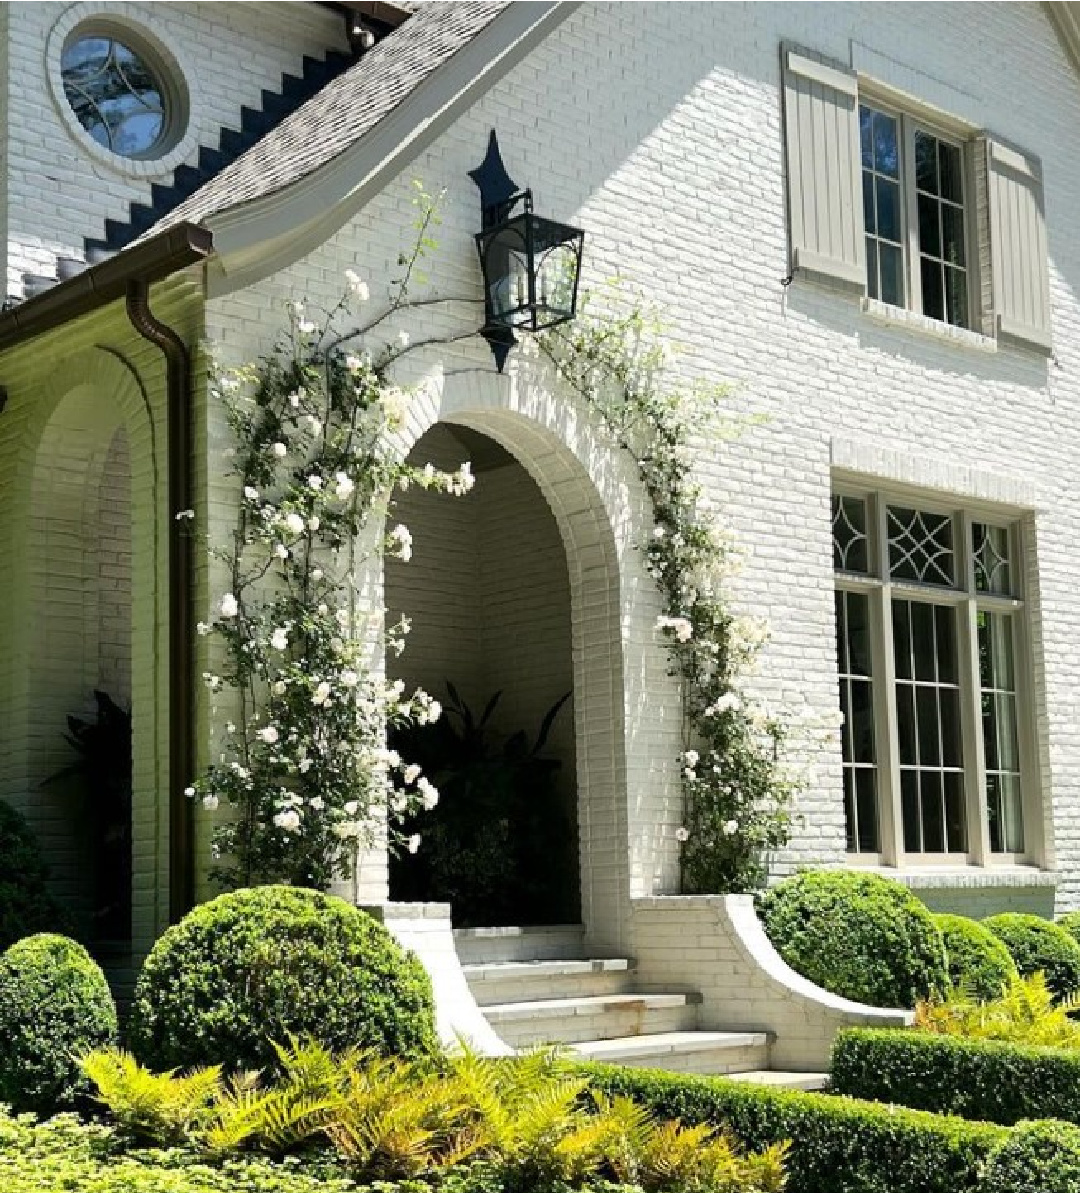 Balboa Mist 1549 painted house exterior. Breathtaking storybook charm of a Tudor style white painted brick home renovated by @ladisicfinehomes with arched entrance softened by roses - photo by Sherry Hart. #bmbalboamist #swamazinggray